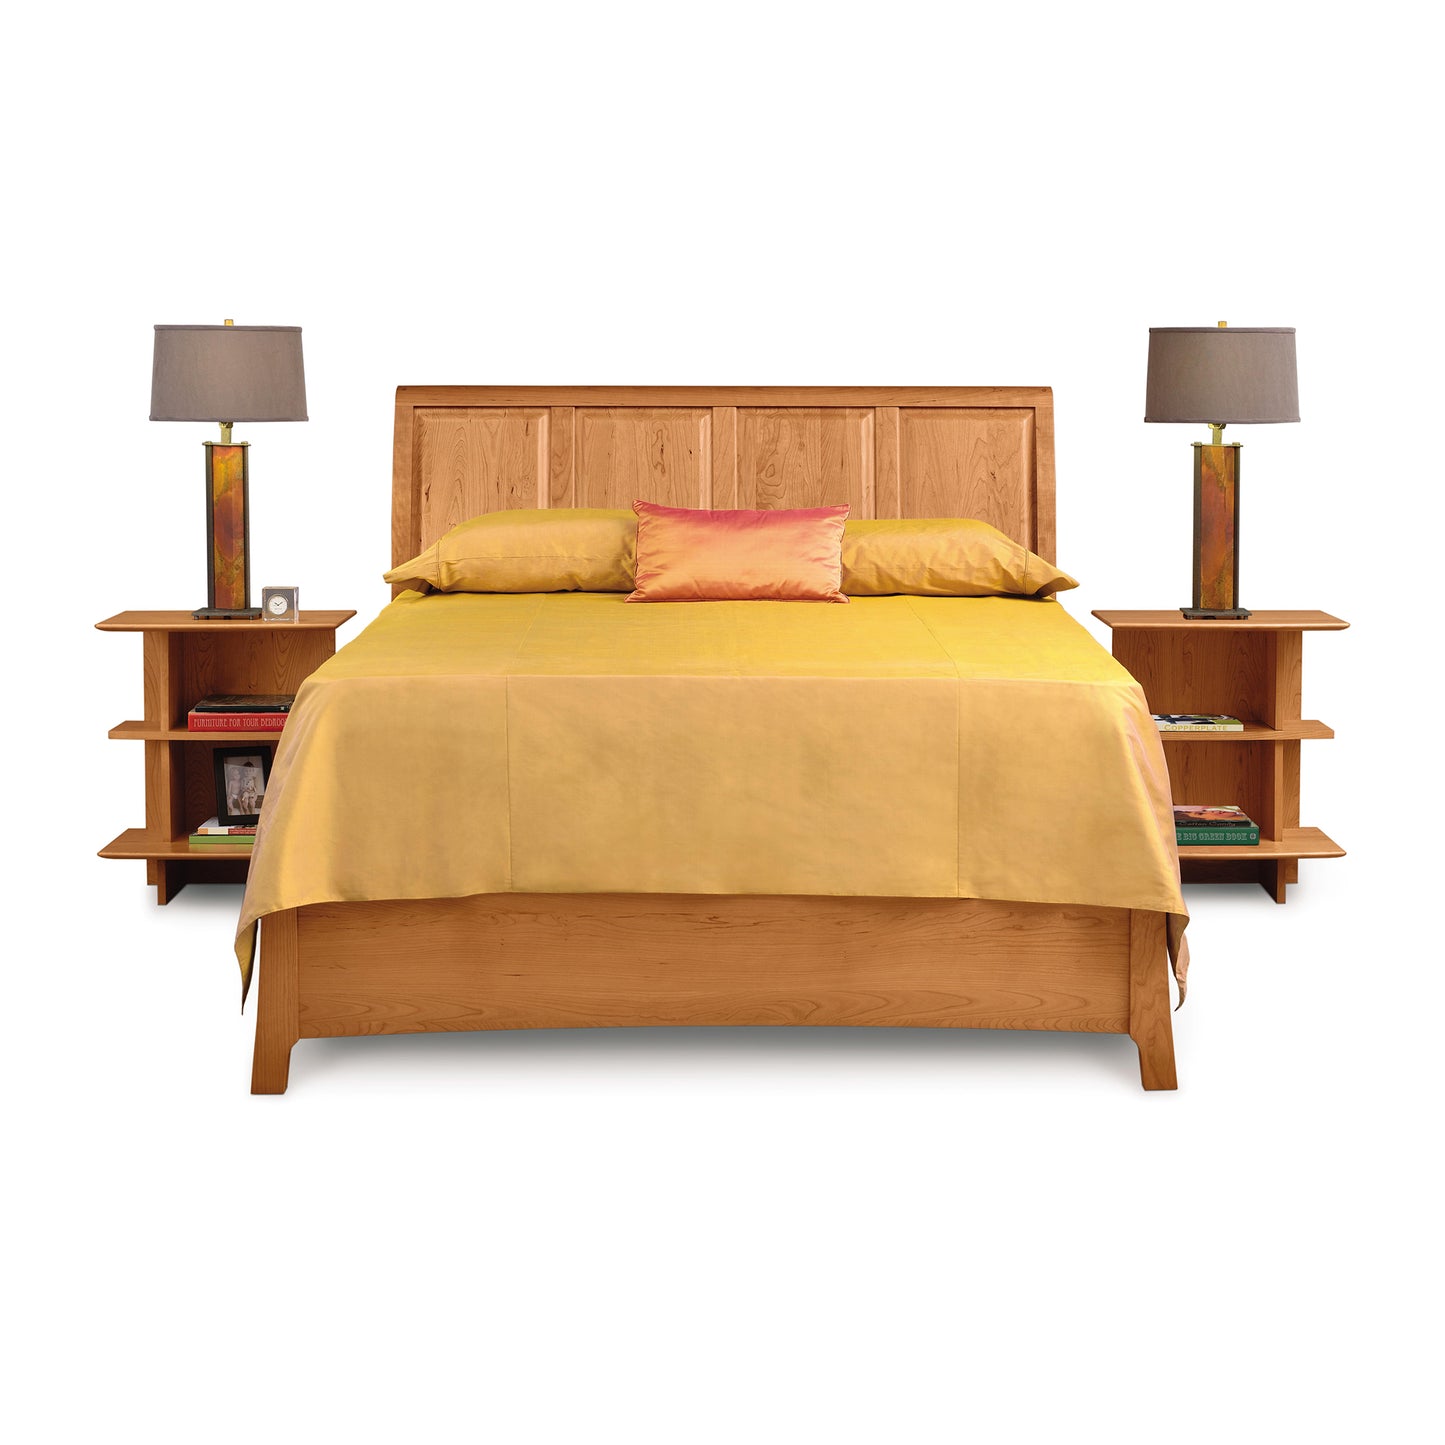 A Sarah Sleigh Storage Bed with matching nightstands and lamps, designed in the Shaker-style Copeland Furniture Sarah Bedroom Furniture line, dressed with a yellow bedspread and a decorative pink pillow, isolated on a white background.